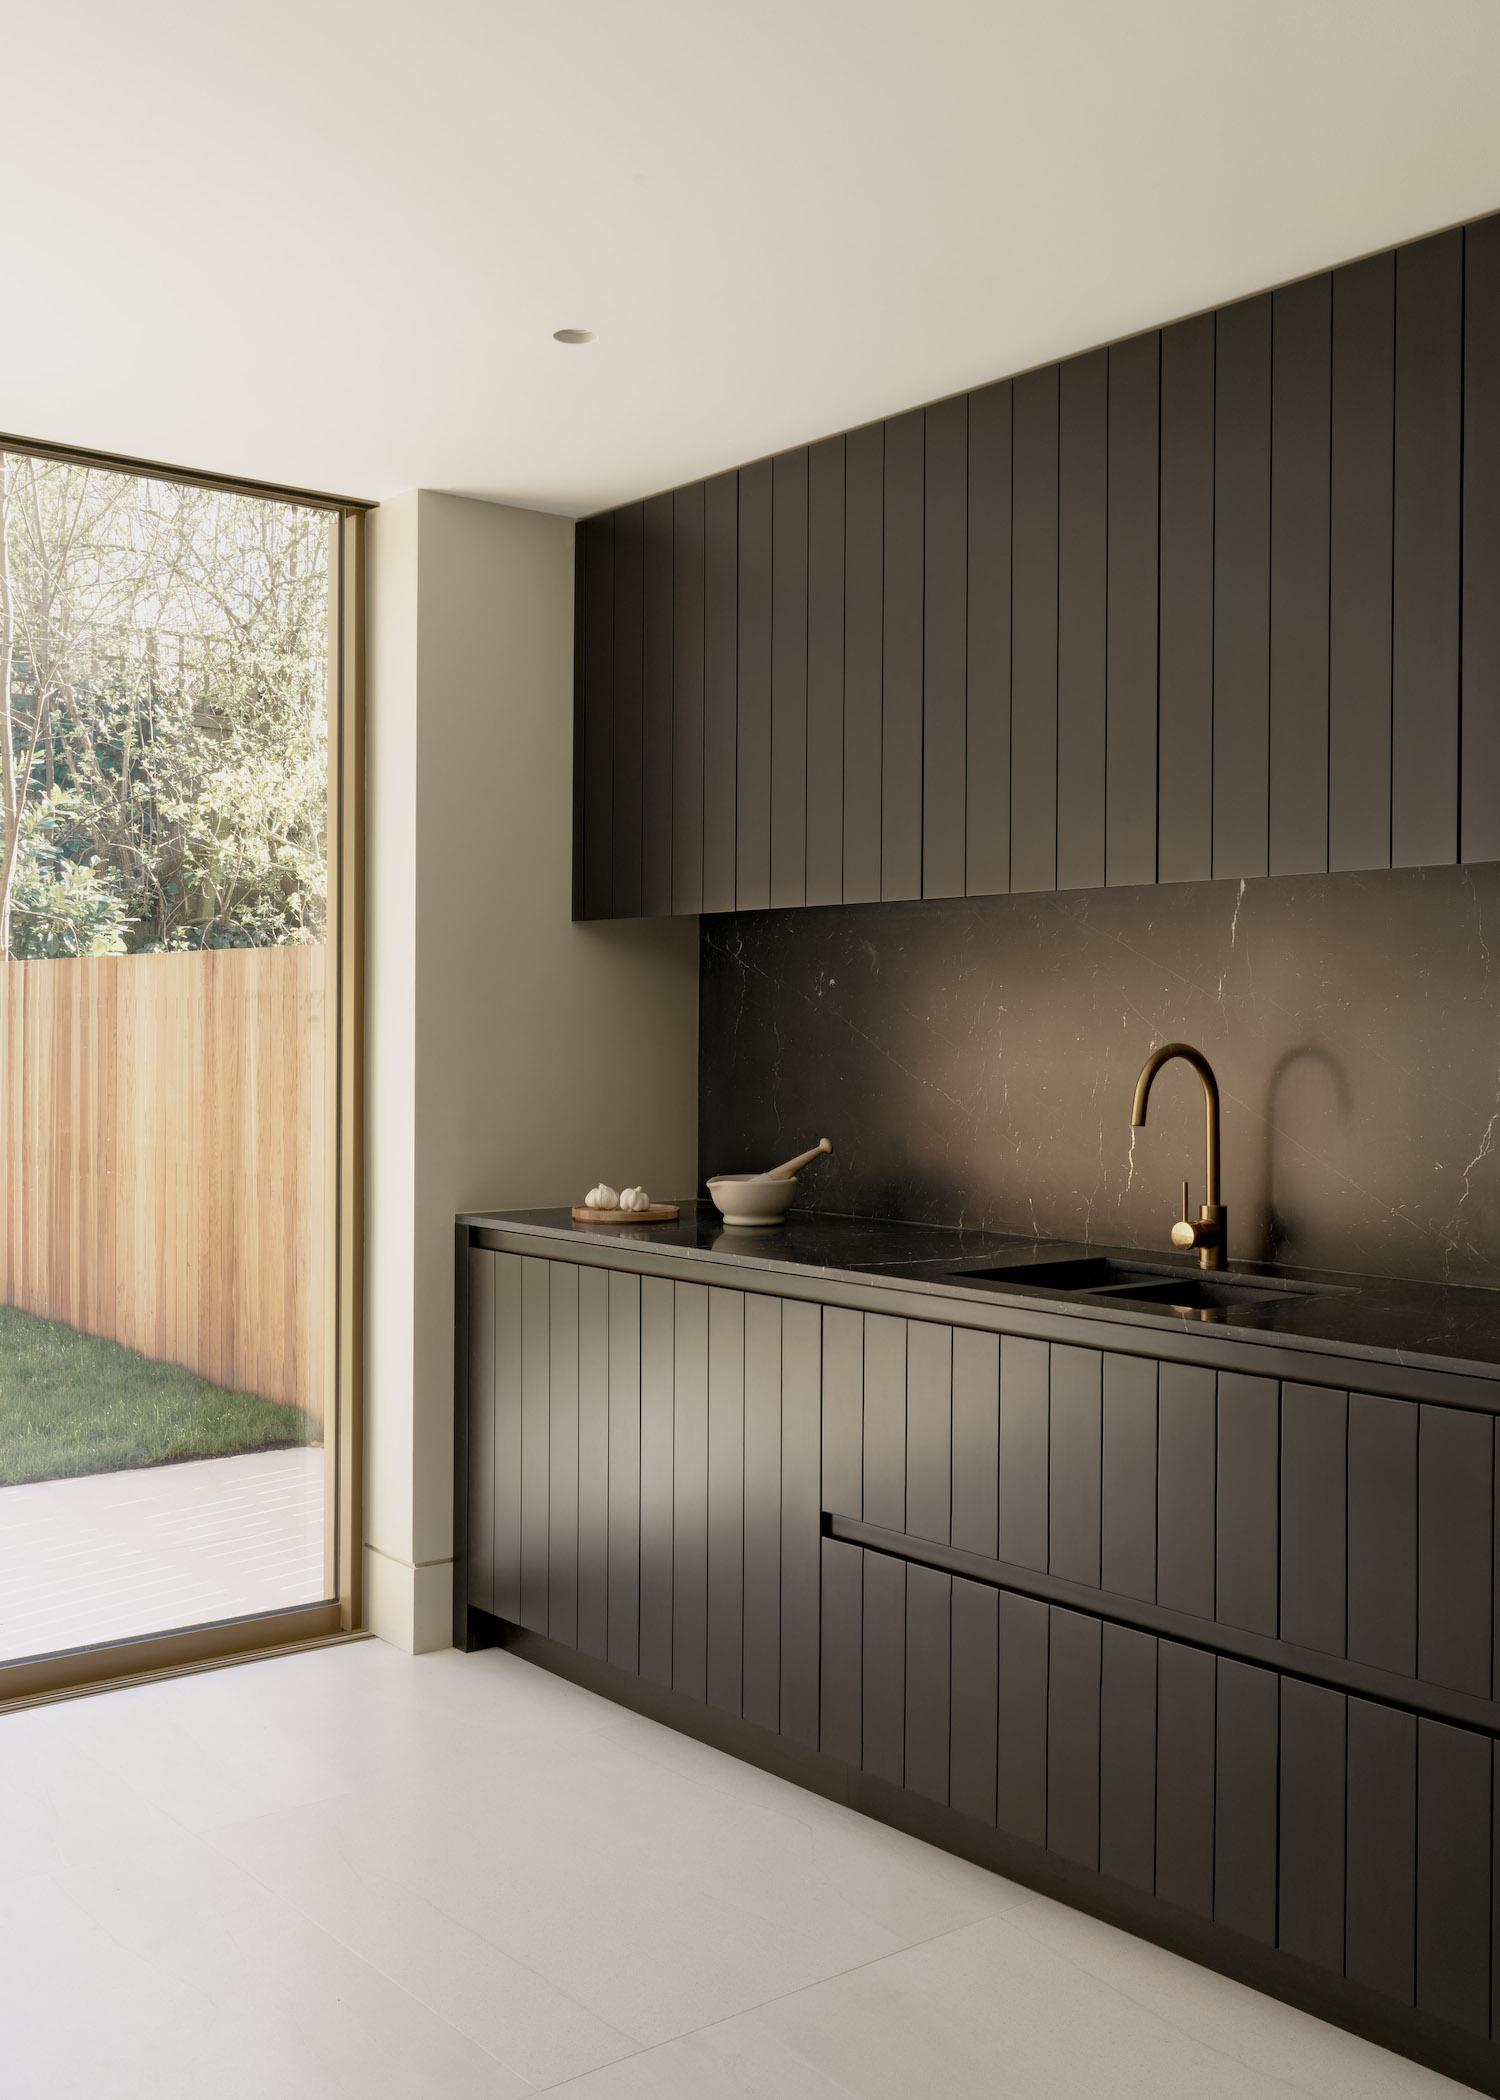 A Terrace House in London renovated by Oliver Leech Architects